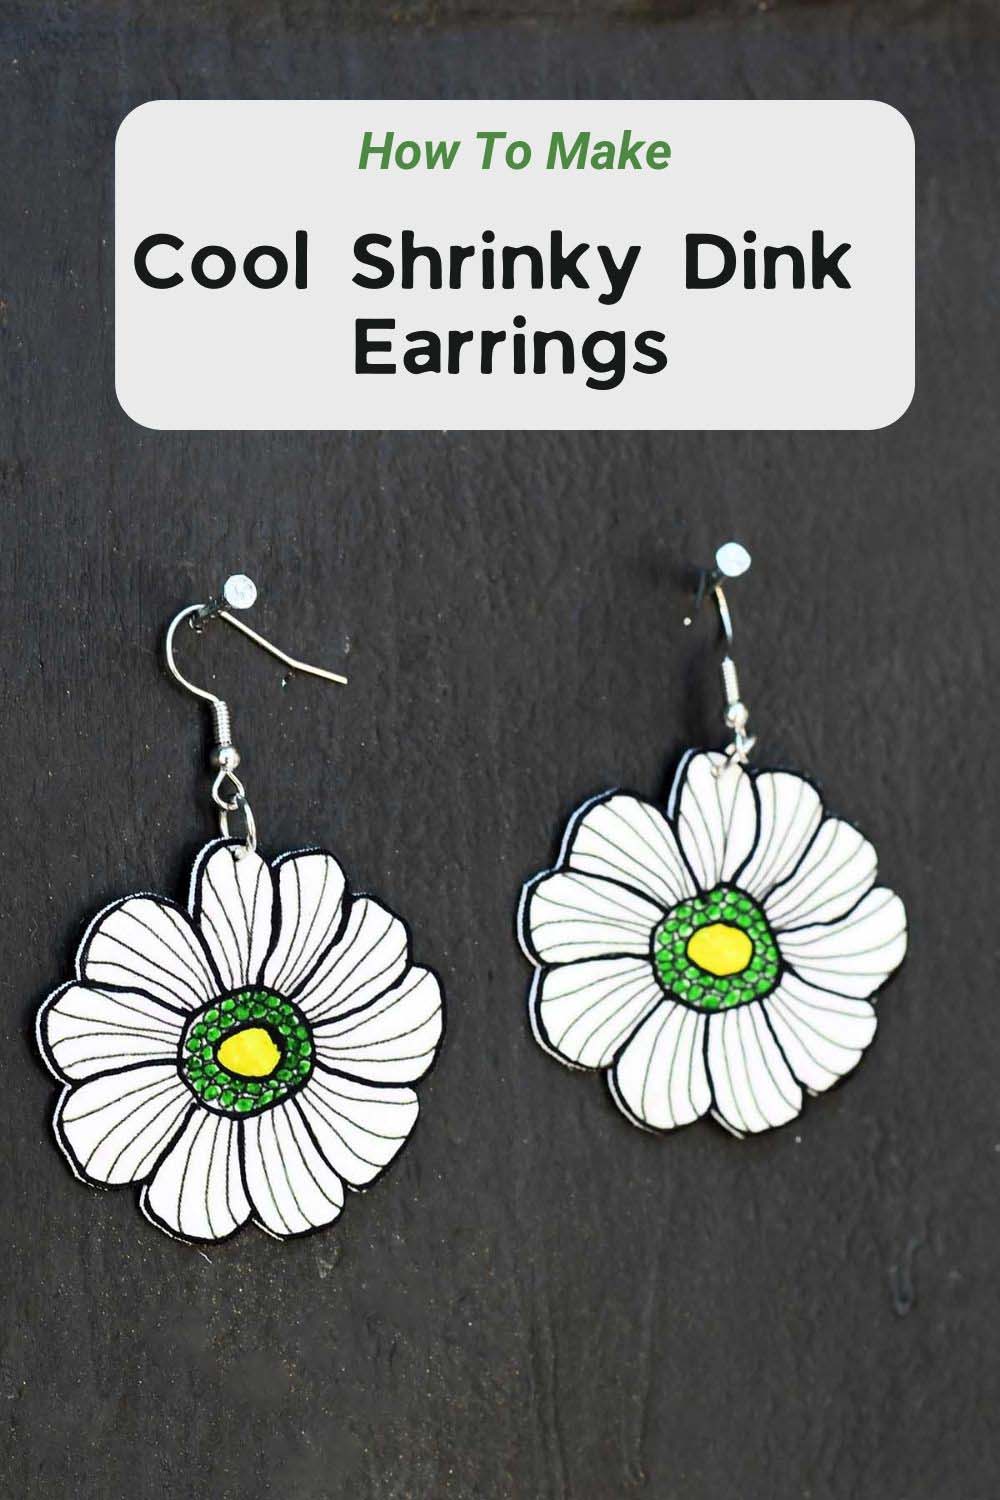 How To Make Shrinky Dink Earrings - A Fun Craft For All - Pillar